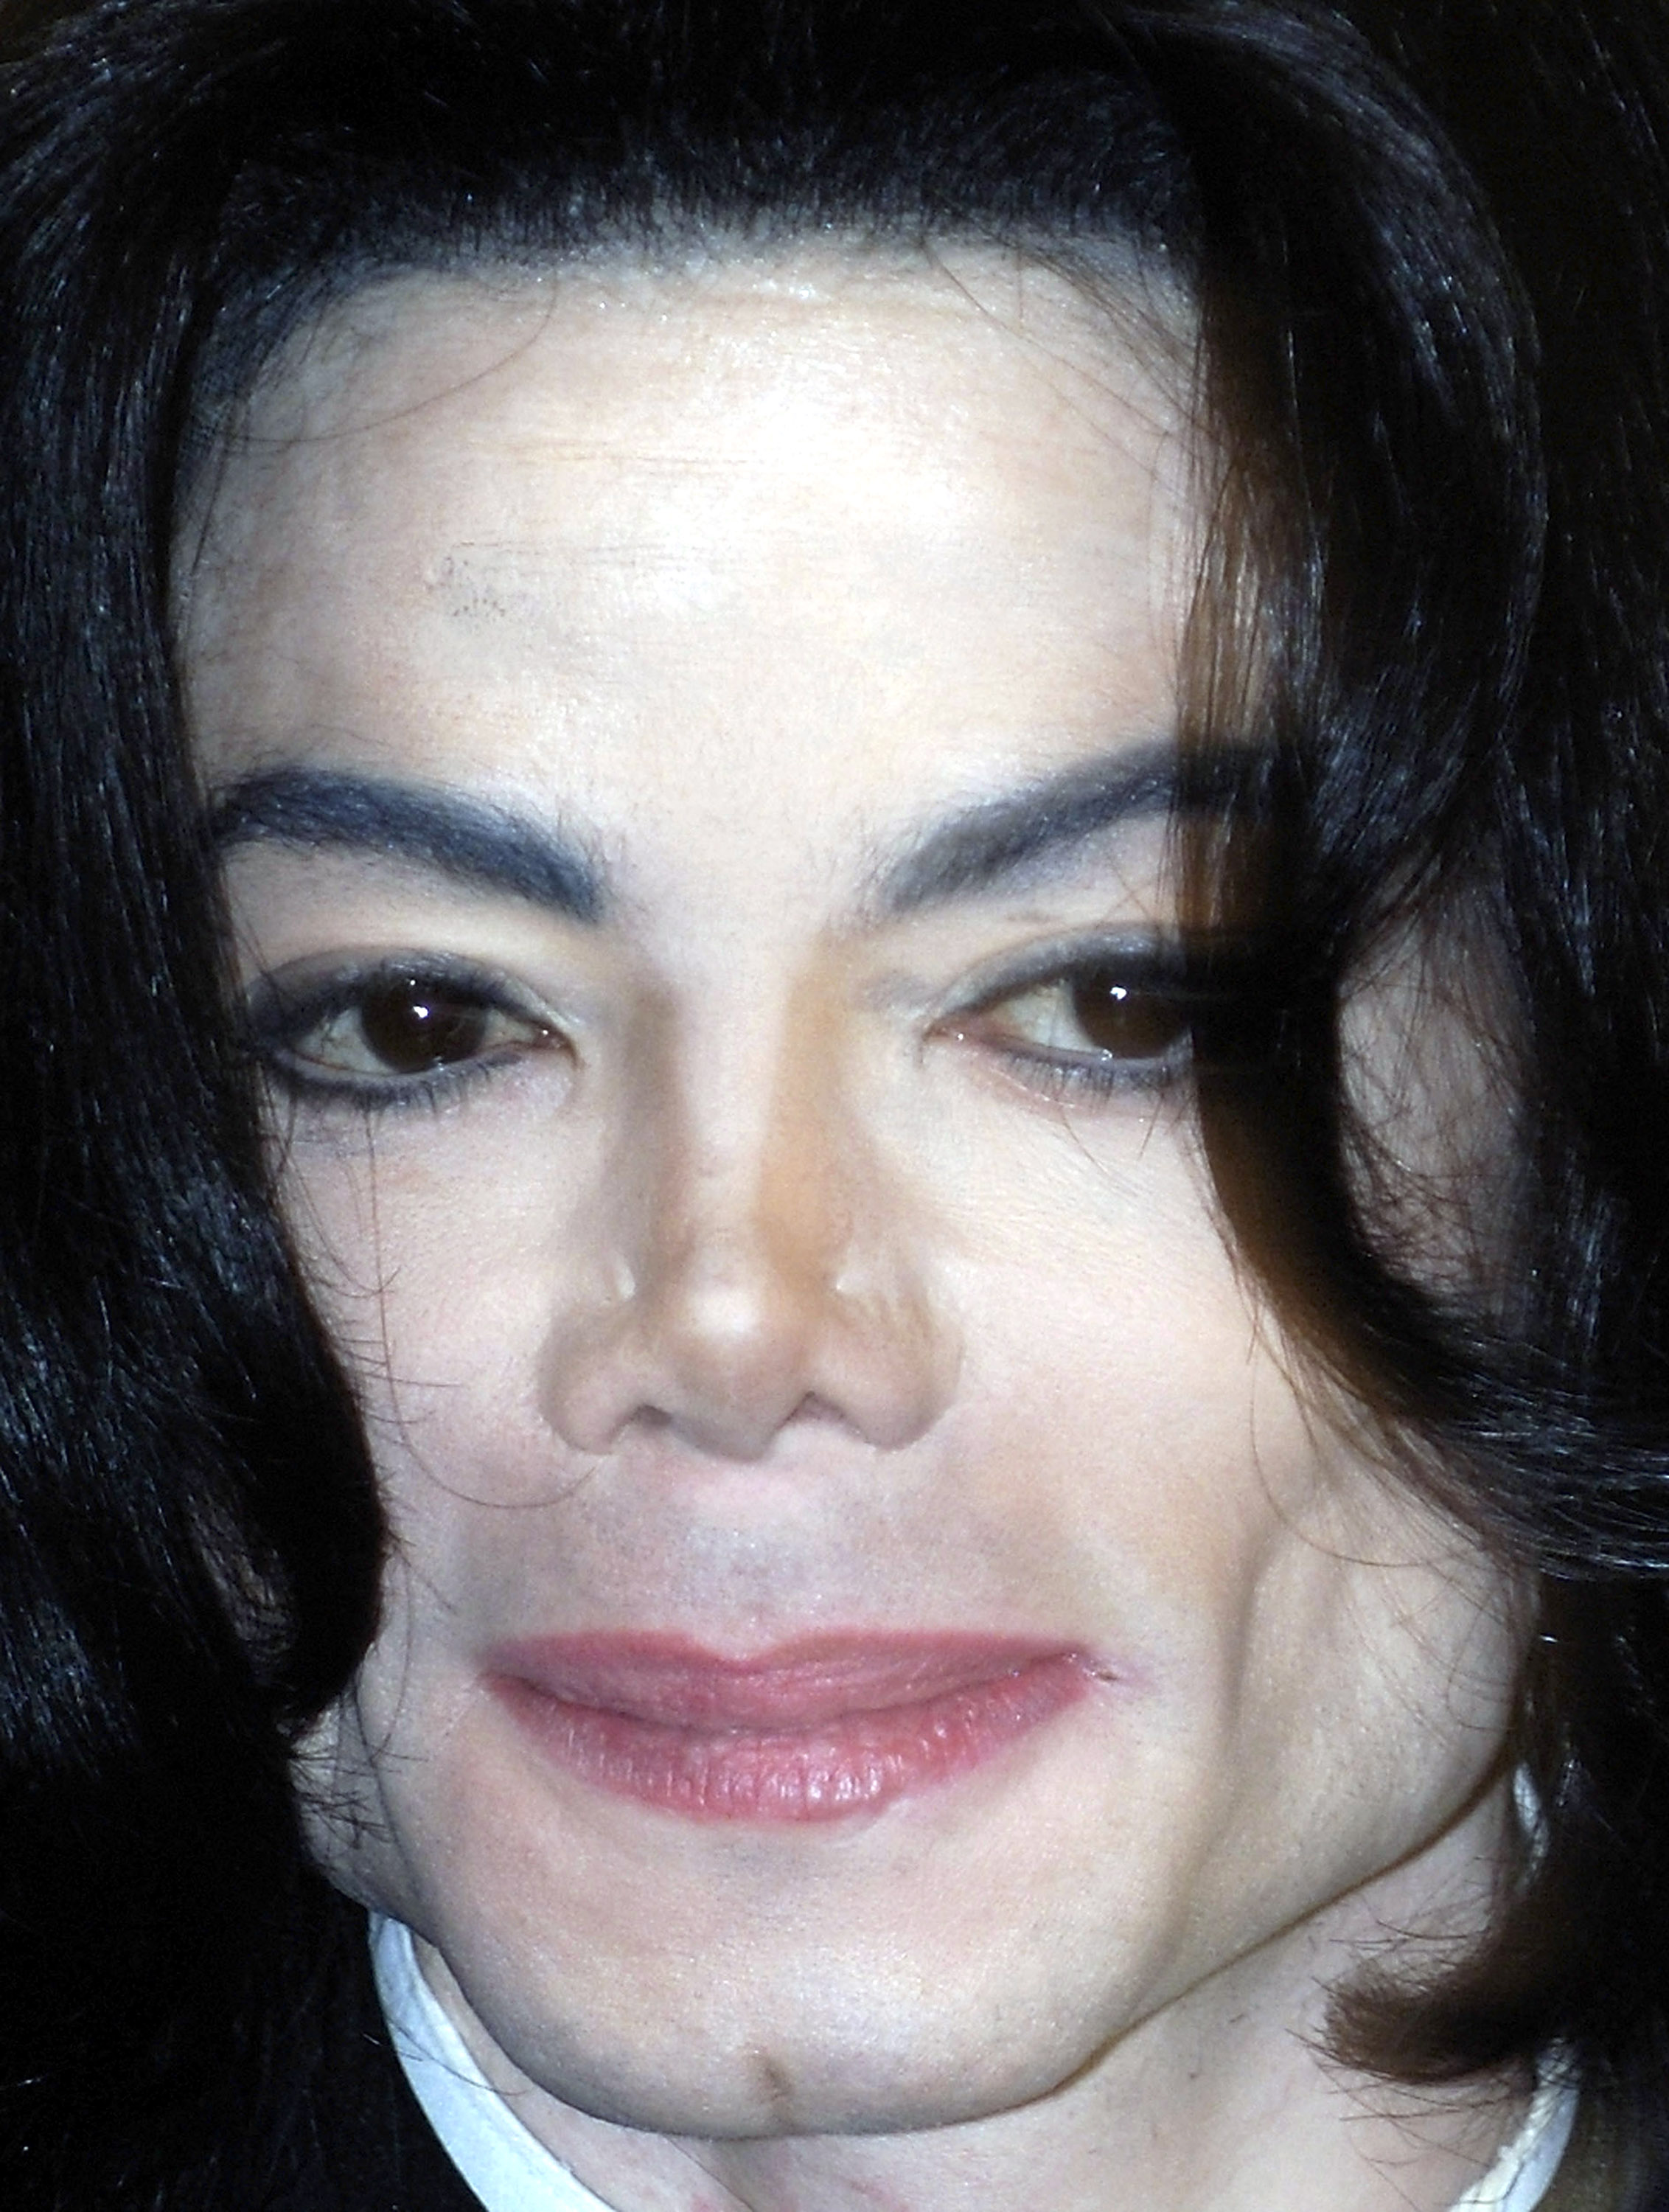 Michael Jackson seen on May 2, 2005 in Santa Maria, California | Source: Getty Images